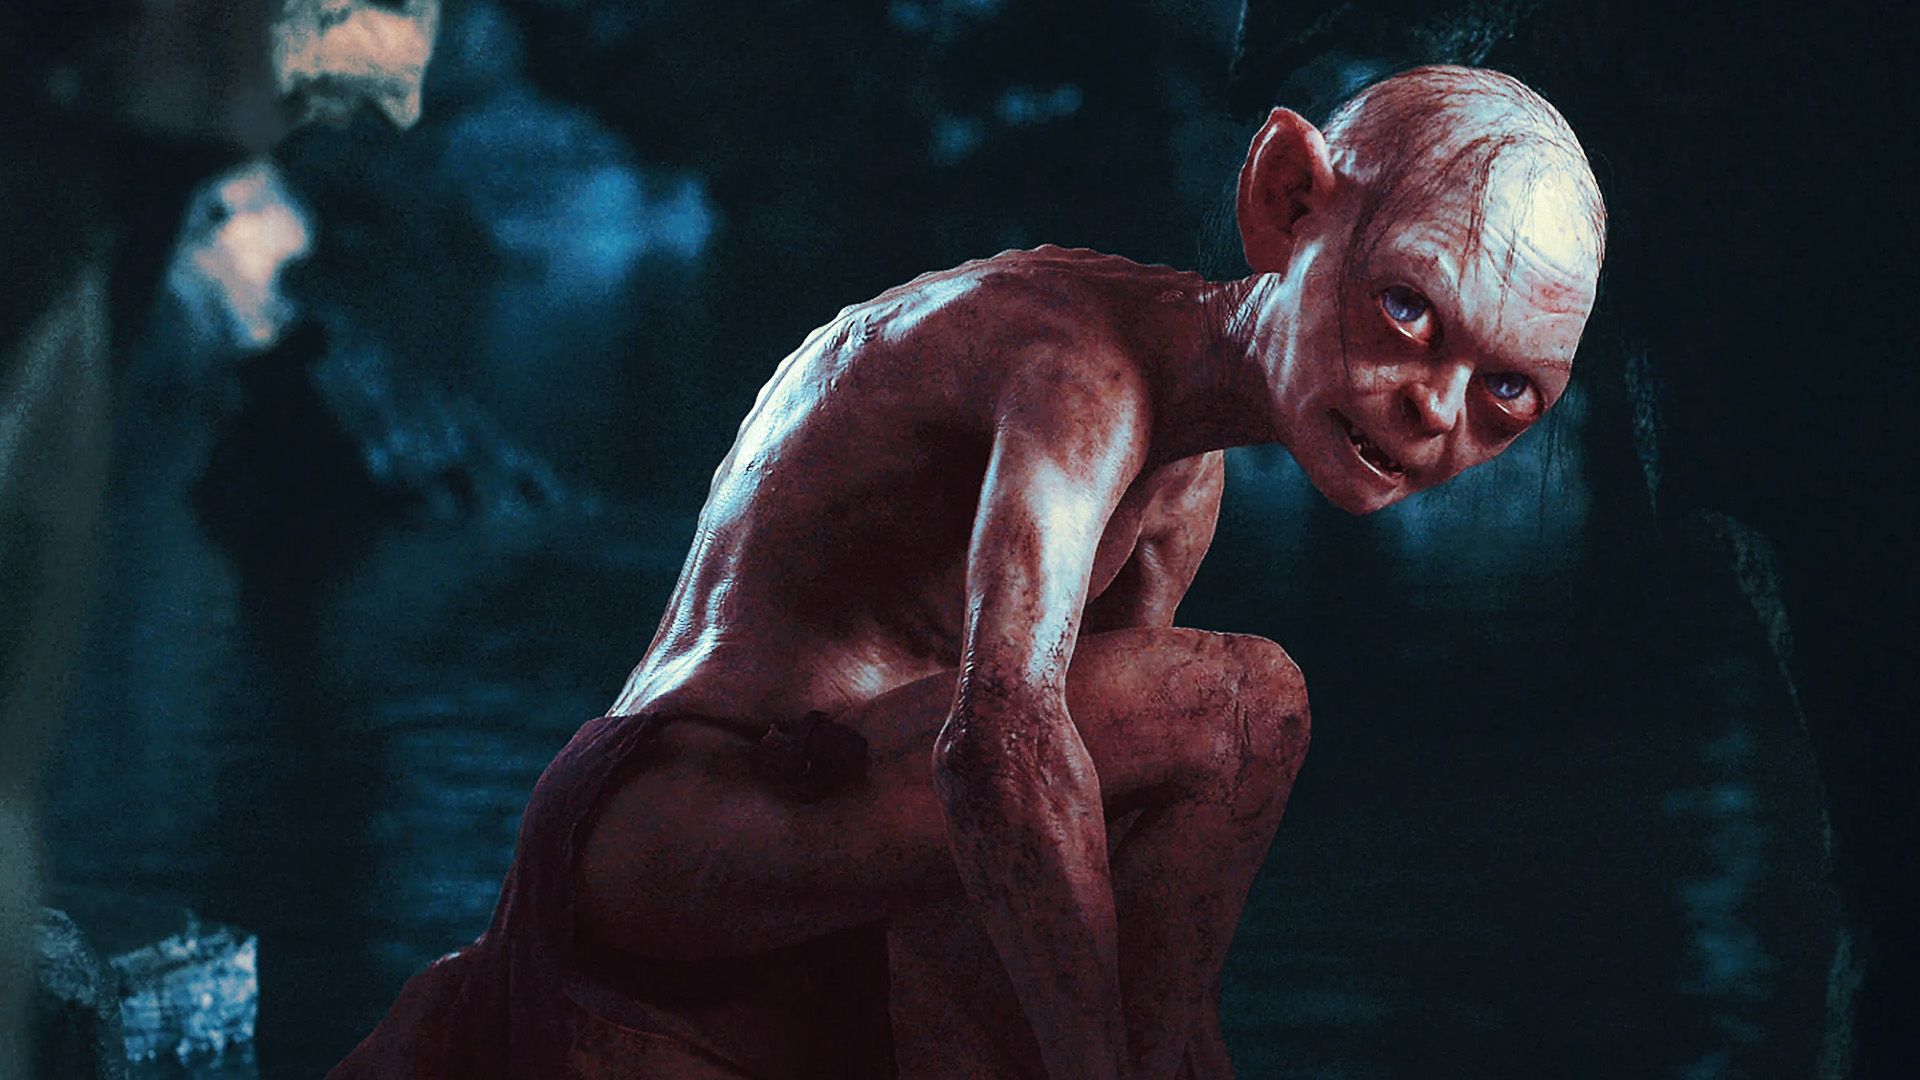 An edited image of Gollum in a cave looking behind him in The Lord of the Rings